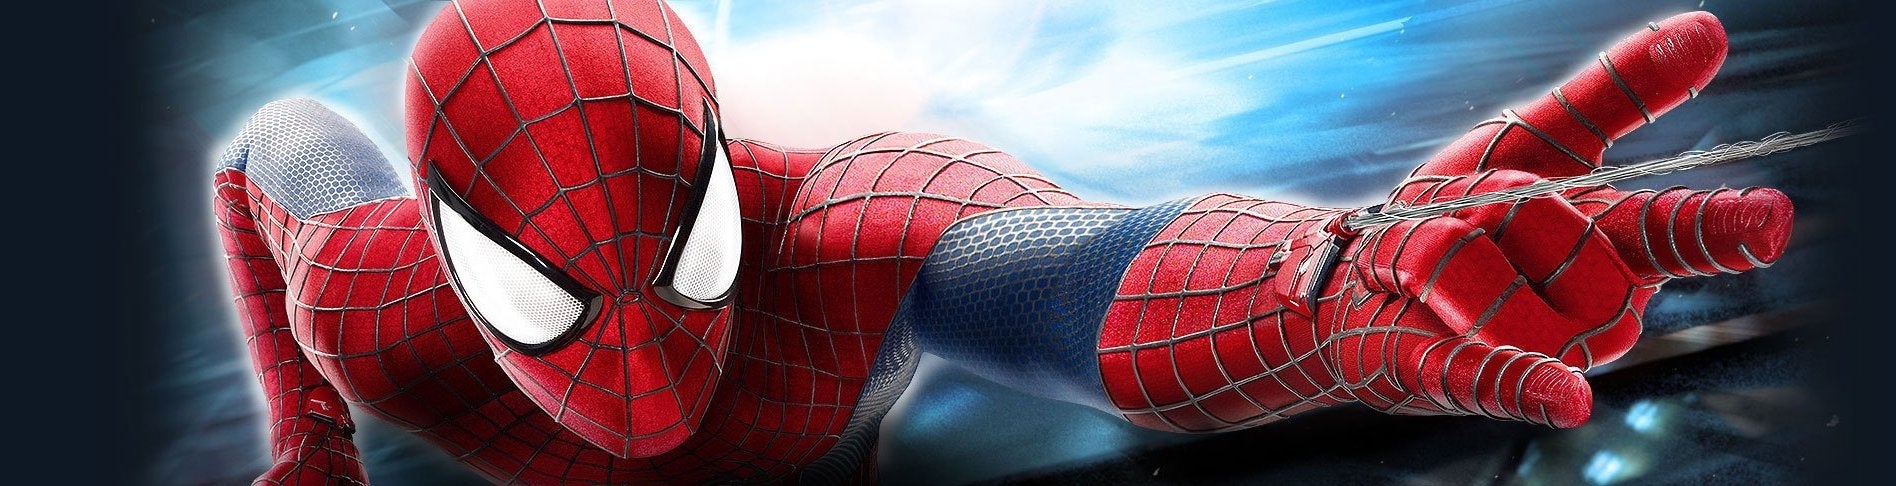 Image for Performance Analysis: The Amazing Spider-Man 2